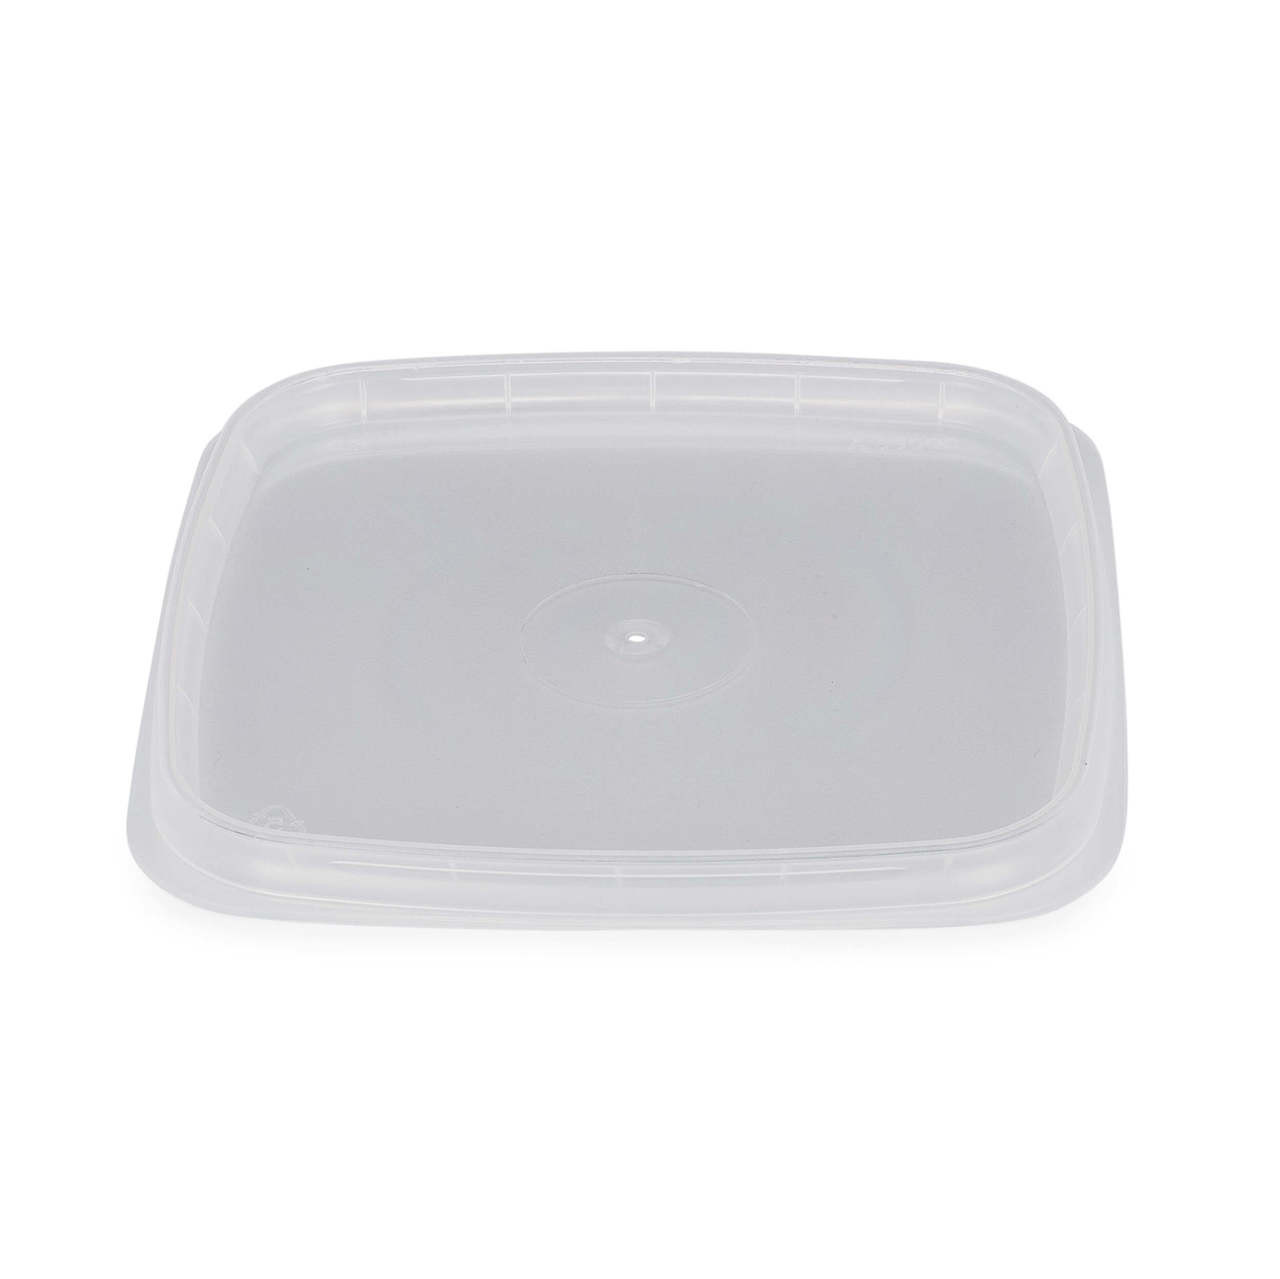 Small Square Tamper-Evident Snap-Lock Lids